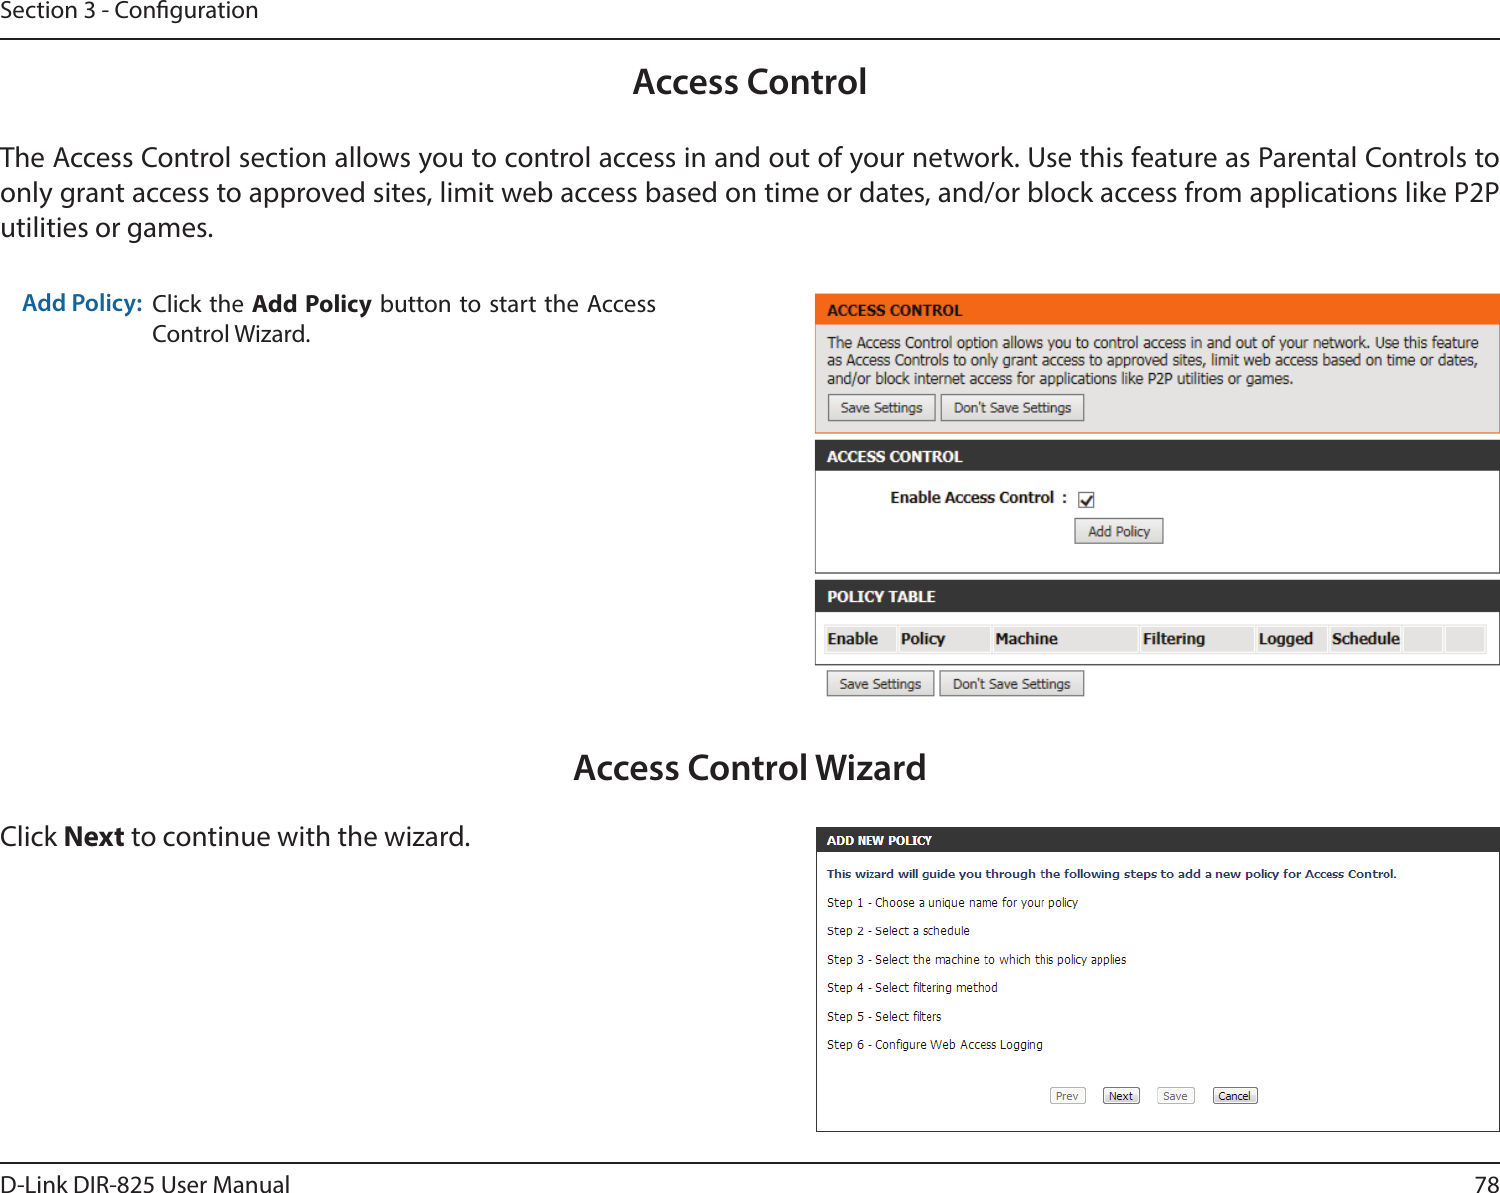 78D-Link DIR-825 User ManualSection 3 - CongurationAccess ControlClick the Add Policy button to start the Access Control Wizard. Add Policy:The Access Control section allows you to control access in and out of your network. Use this feature as Parental Controls to only grant access to approved sites, limit web access based on time or dates, and/or block access from applications like P2P utilities or games.Click Next to continue with the wizard.Access Control Wizard